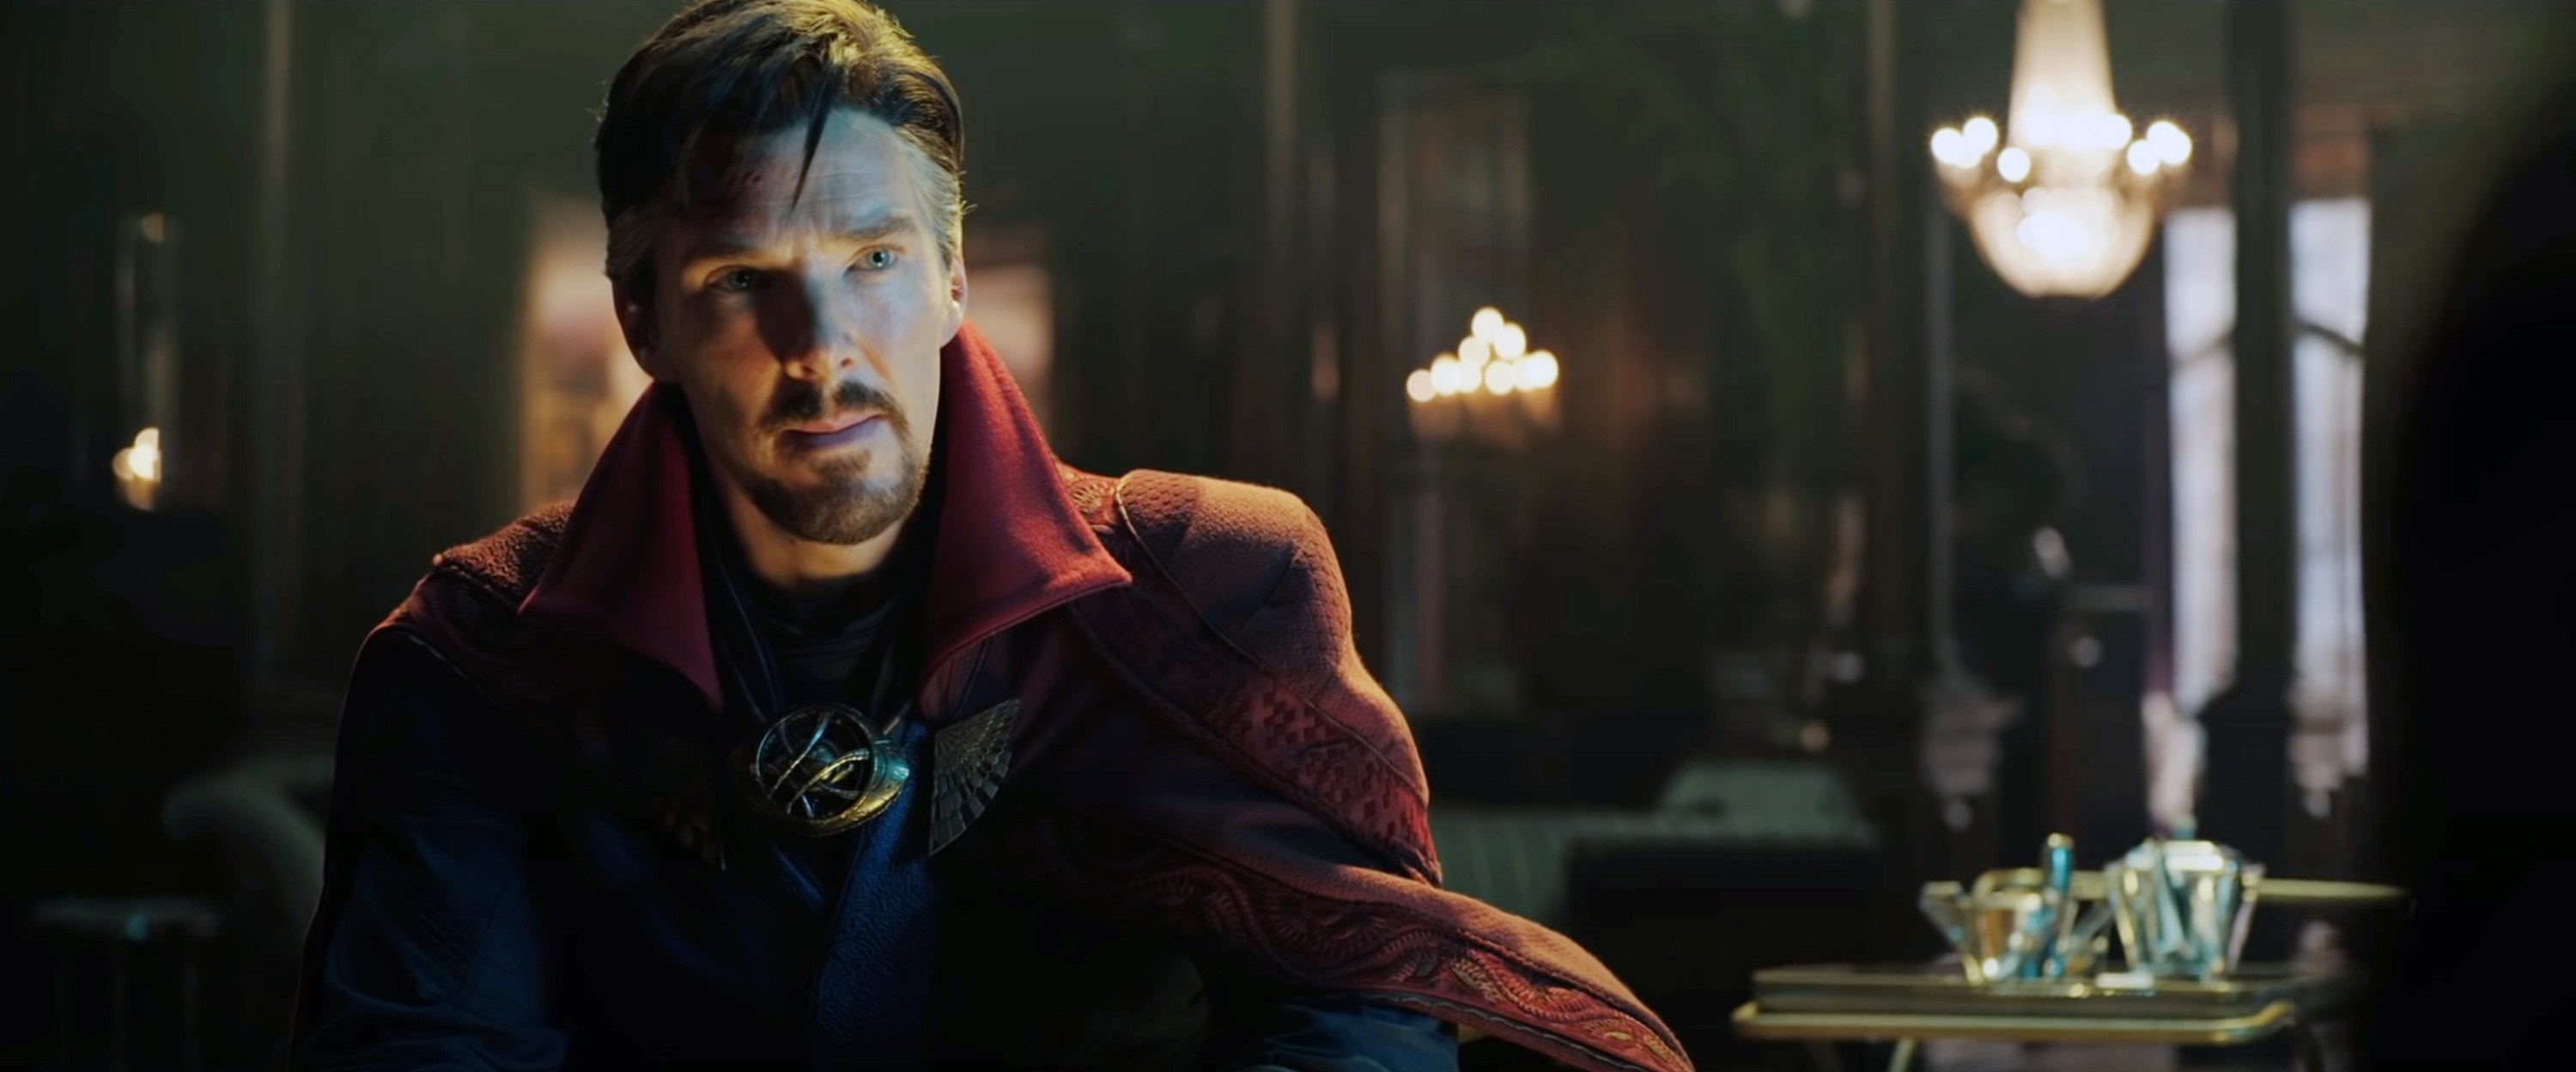 Doctor Strange in a dimly lit room with chandeliers